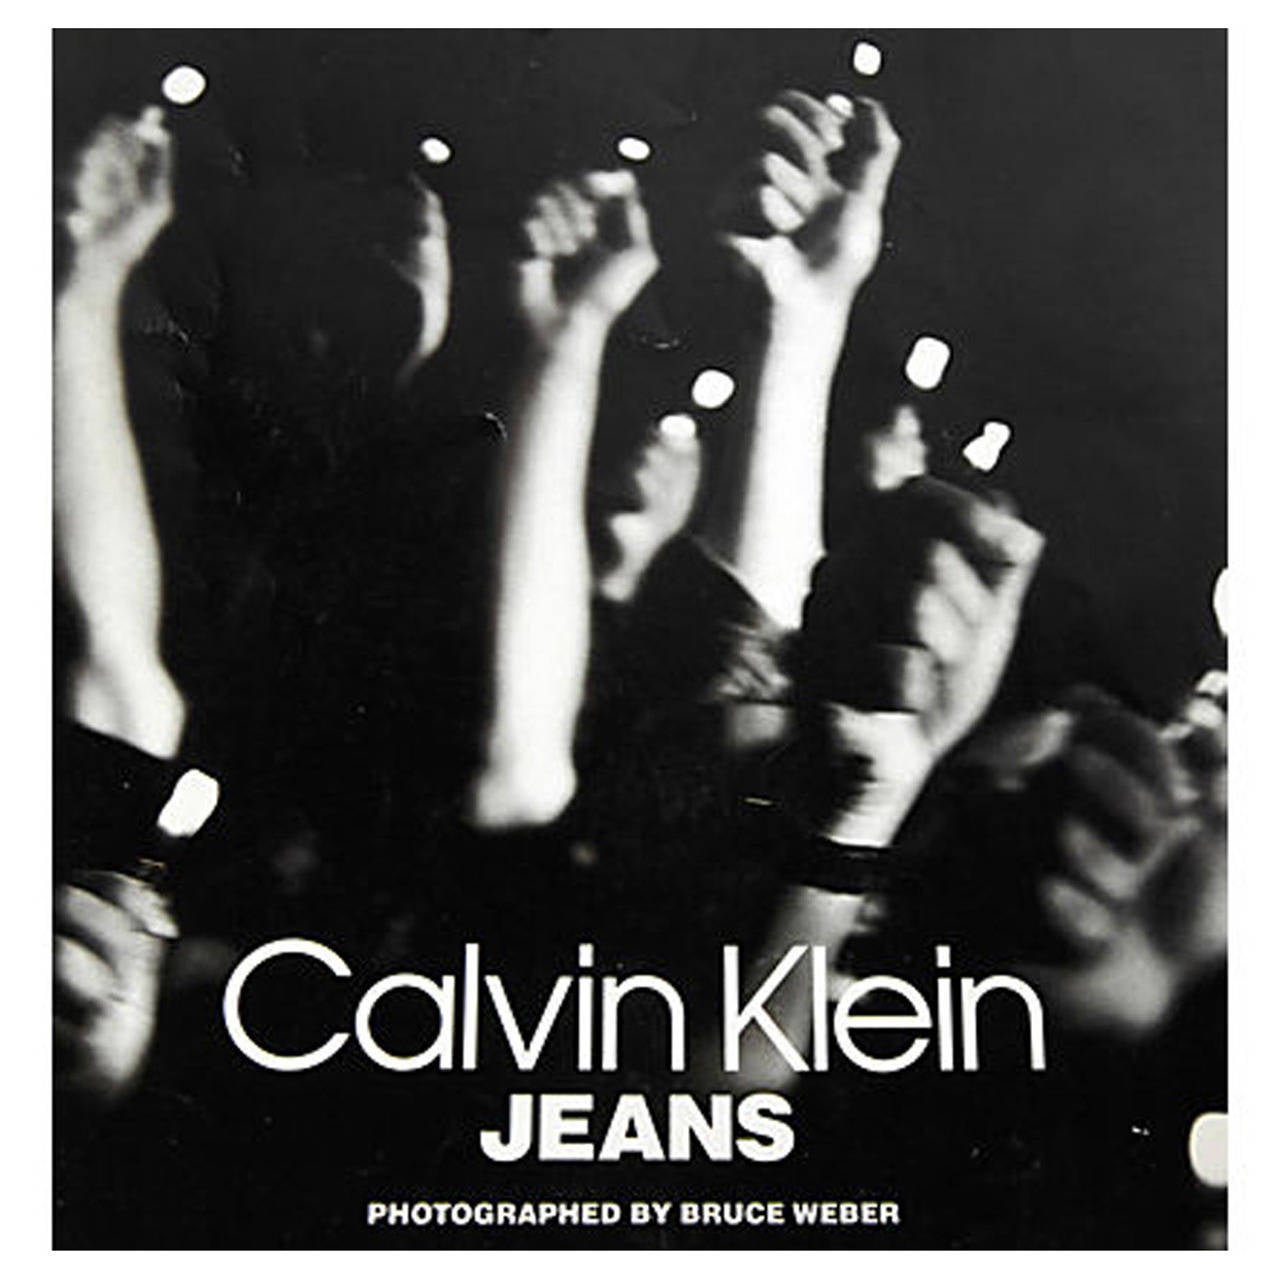 Calvin Klein Jeans" by Bruce Weber, First Edition at 1stDibs